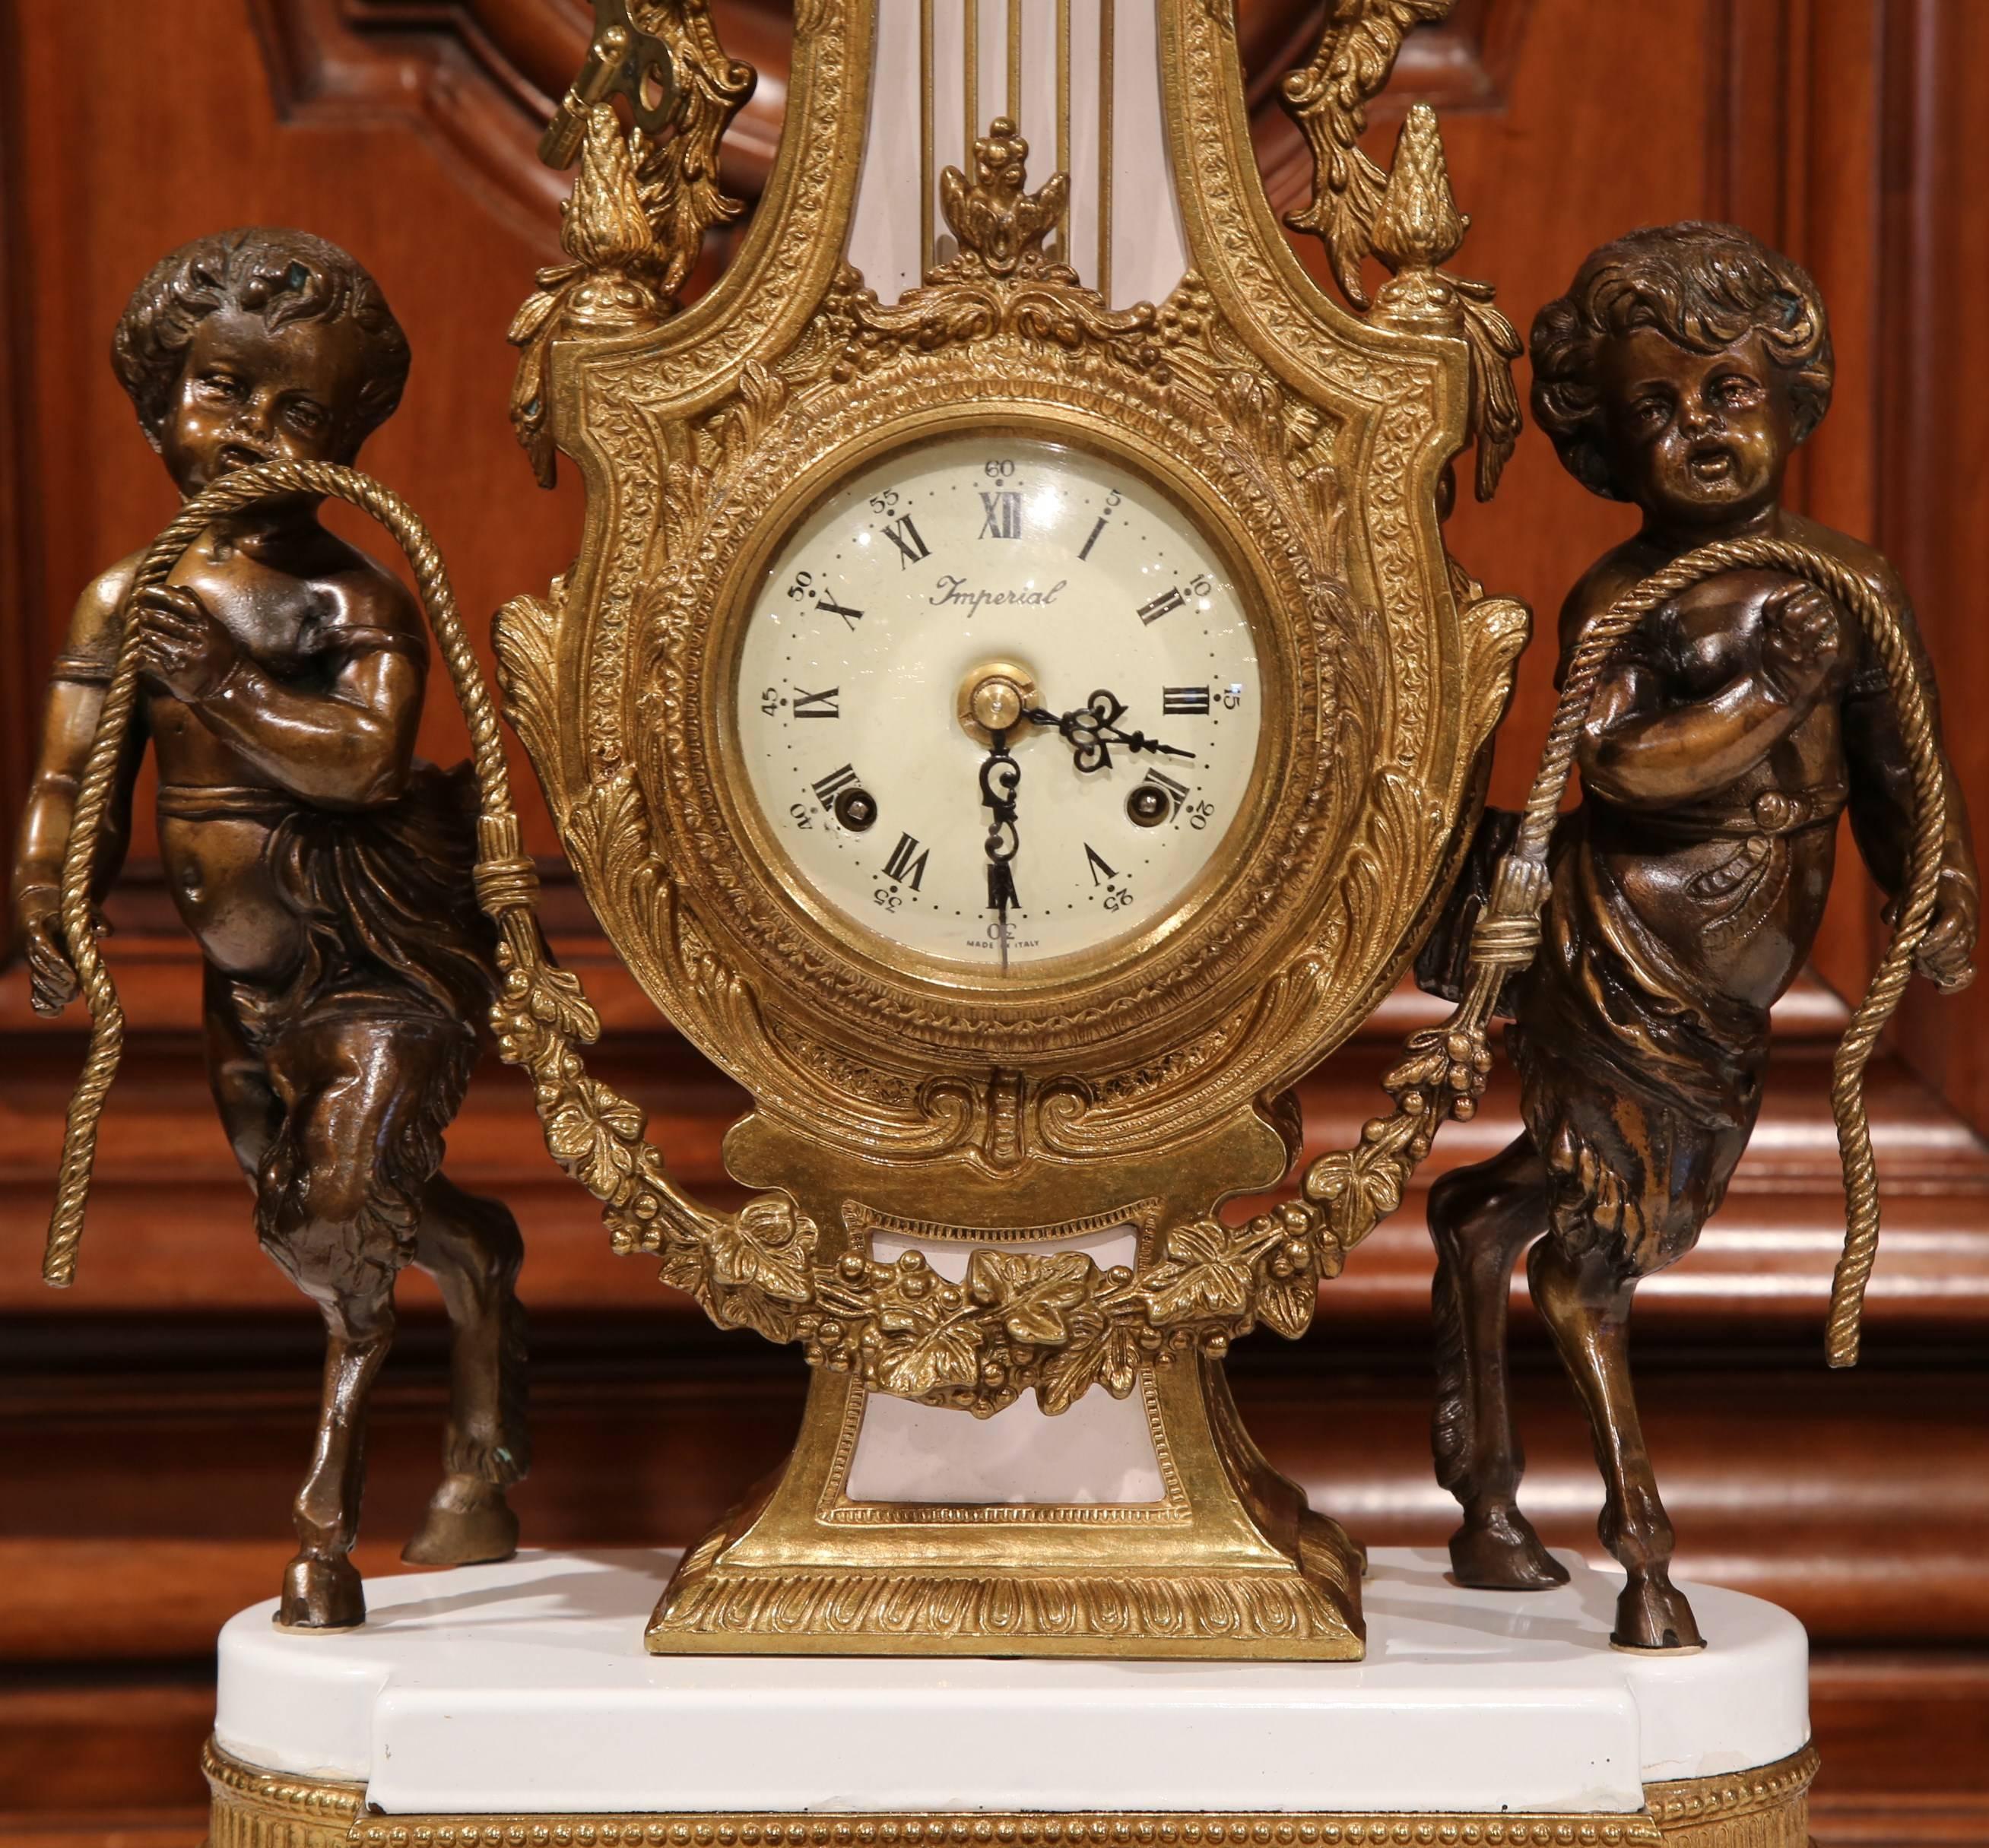 Fine quality bronze mantel or desk clock from Italy, depicting a pair of cherubs on either side of the clock holding a rope. The heavily carved clock with a dial marked Paris, seats on a white marble and an intricate bronze base with decorative